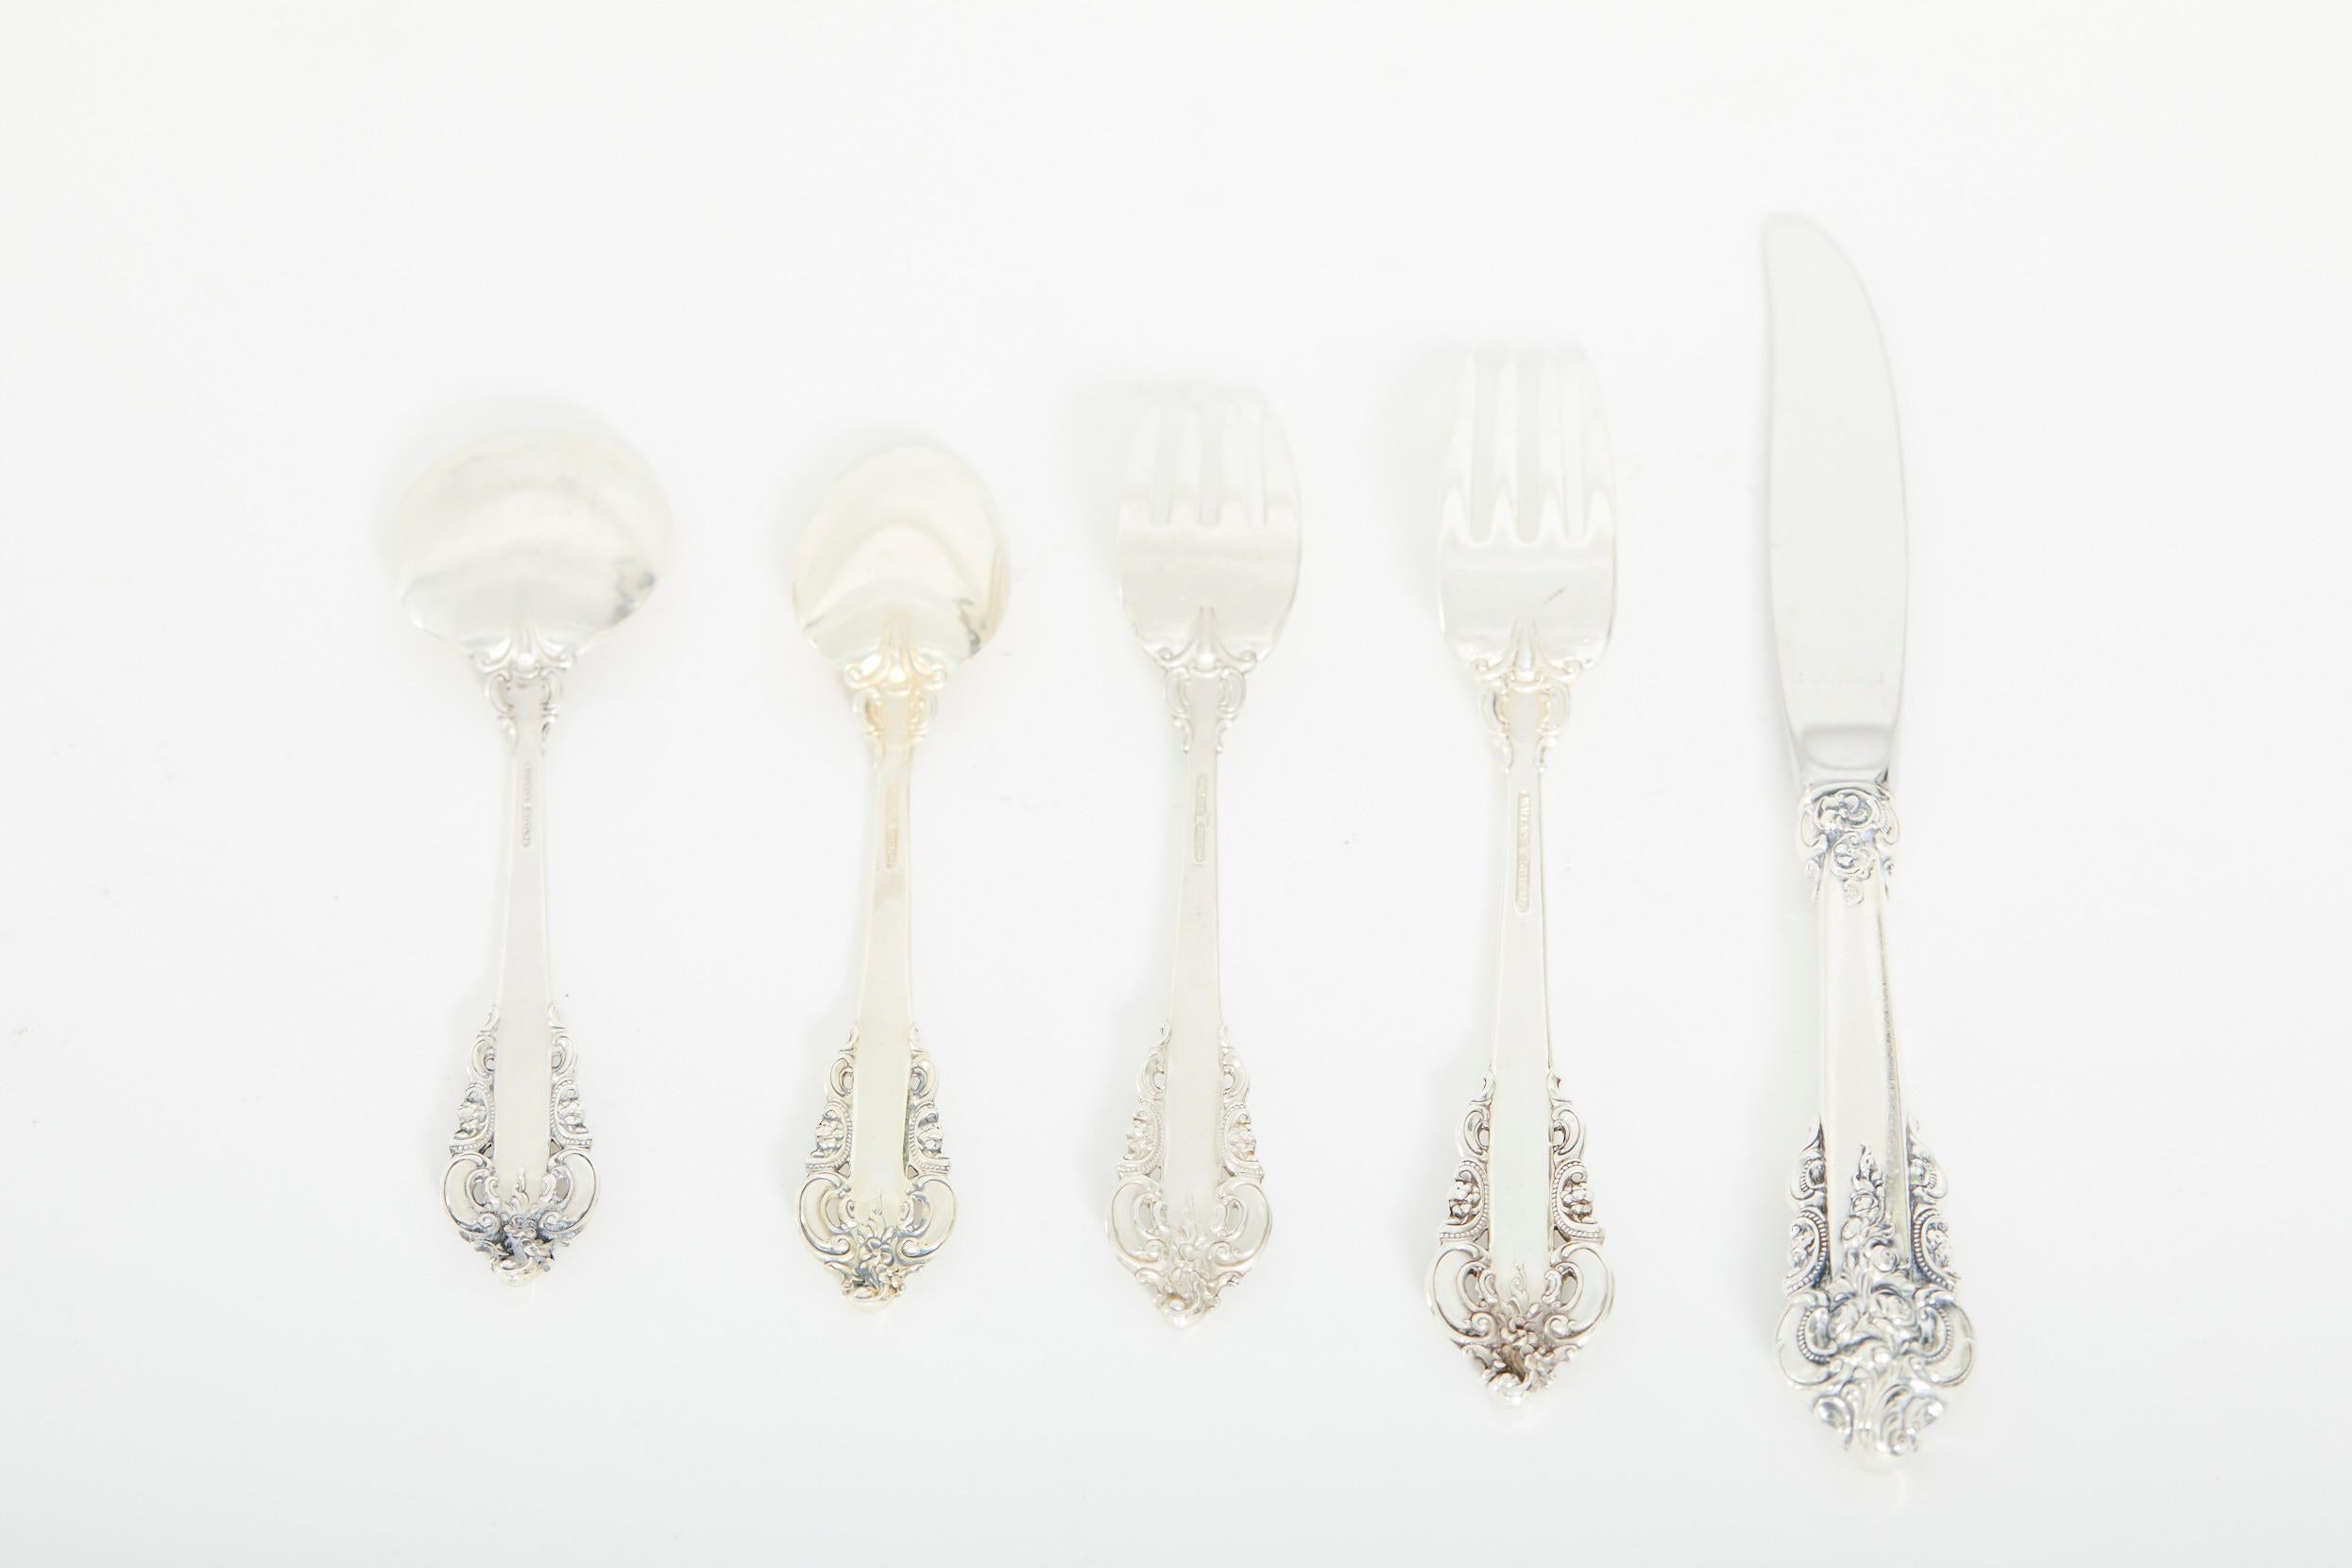 Sterling Silver Flatware / Tableware Service for 24 People For Sale 2